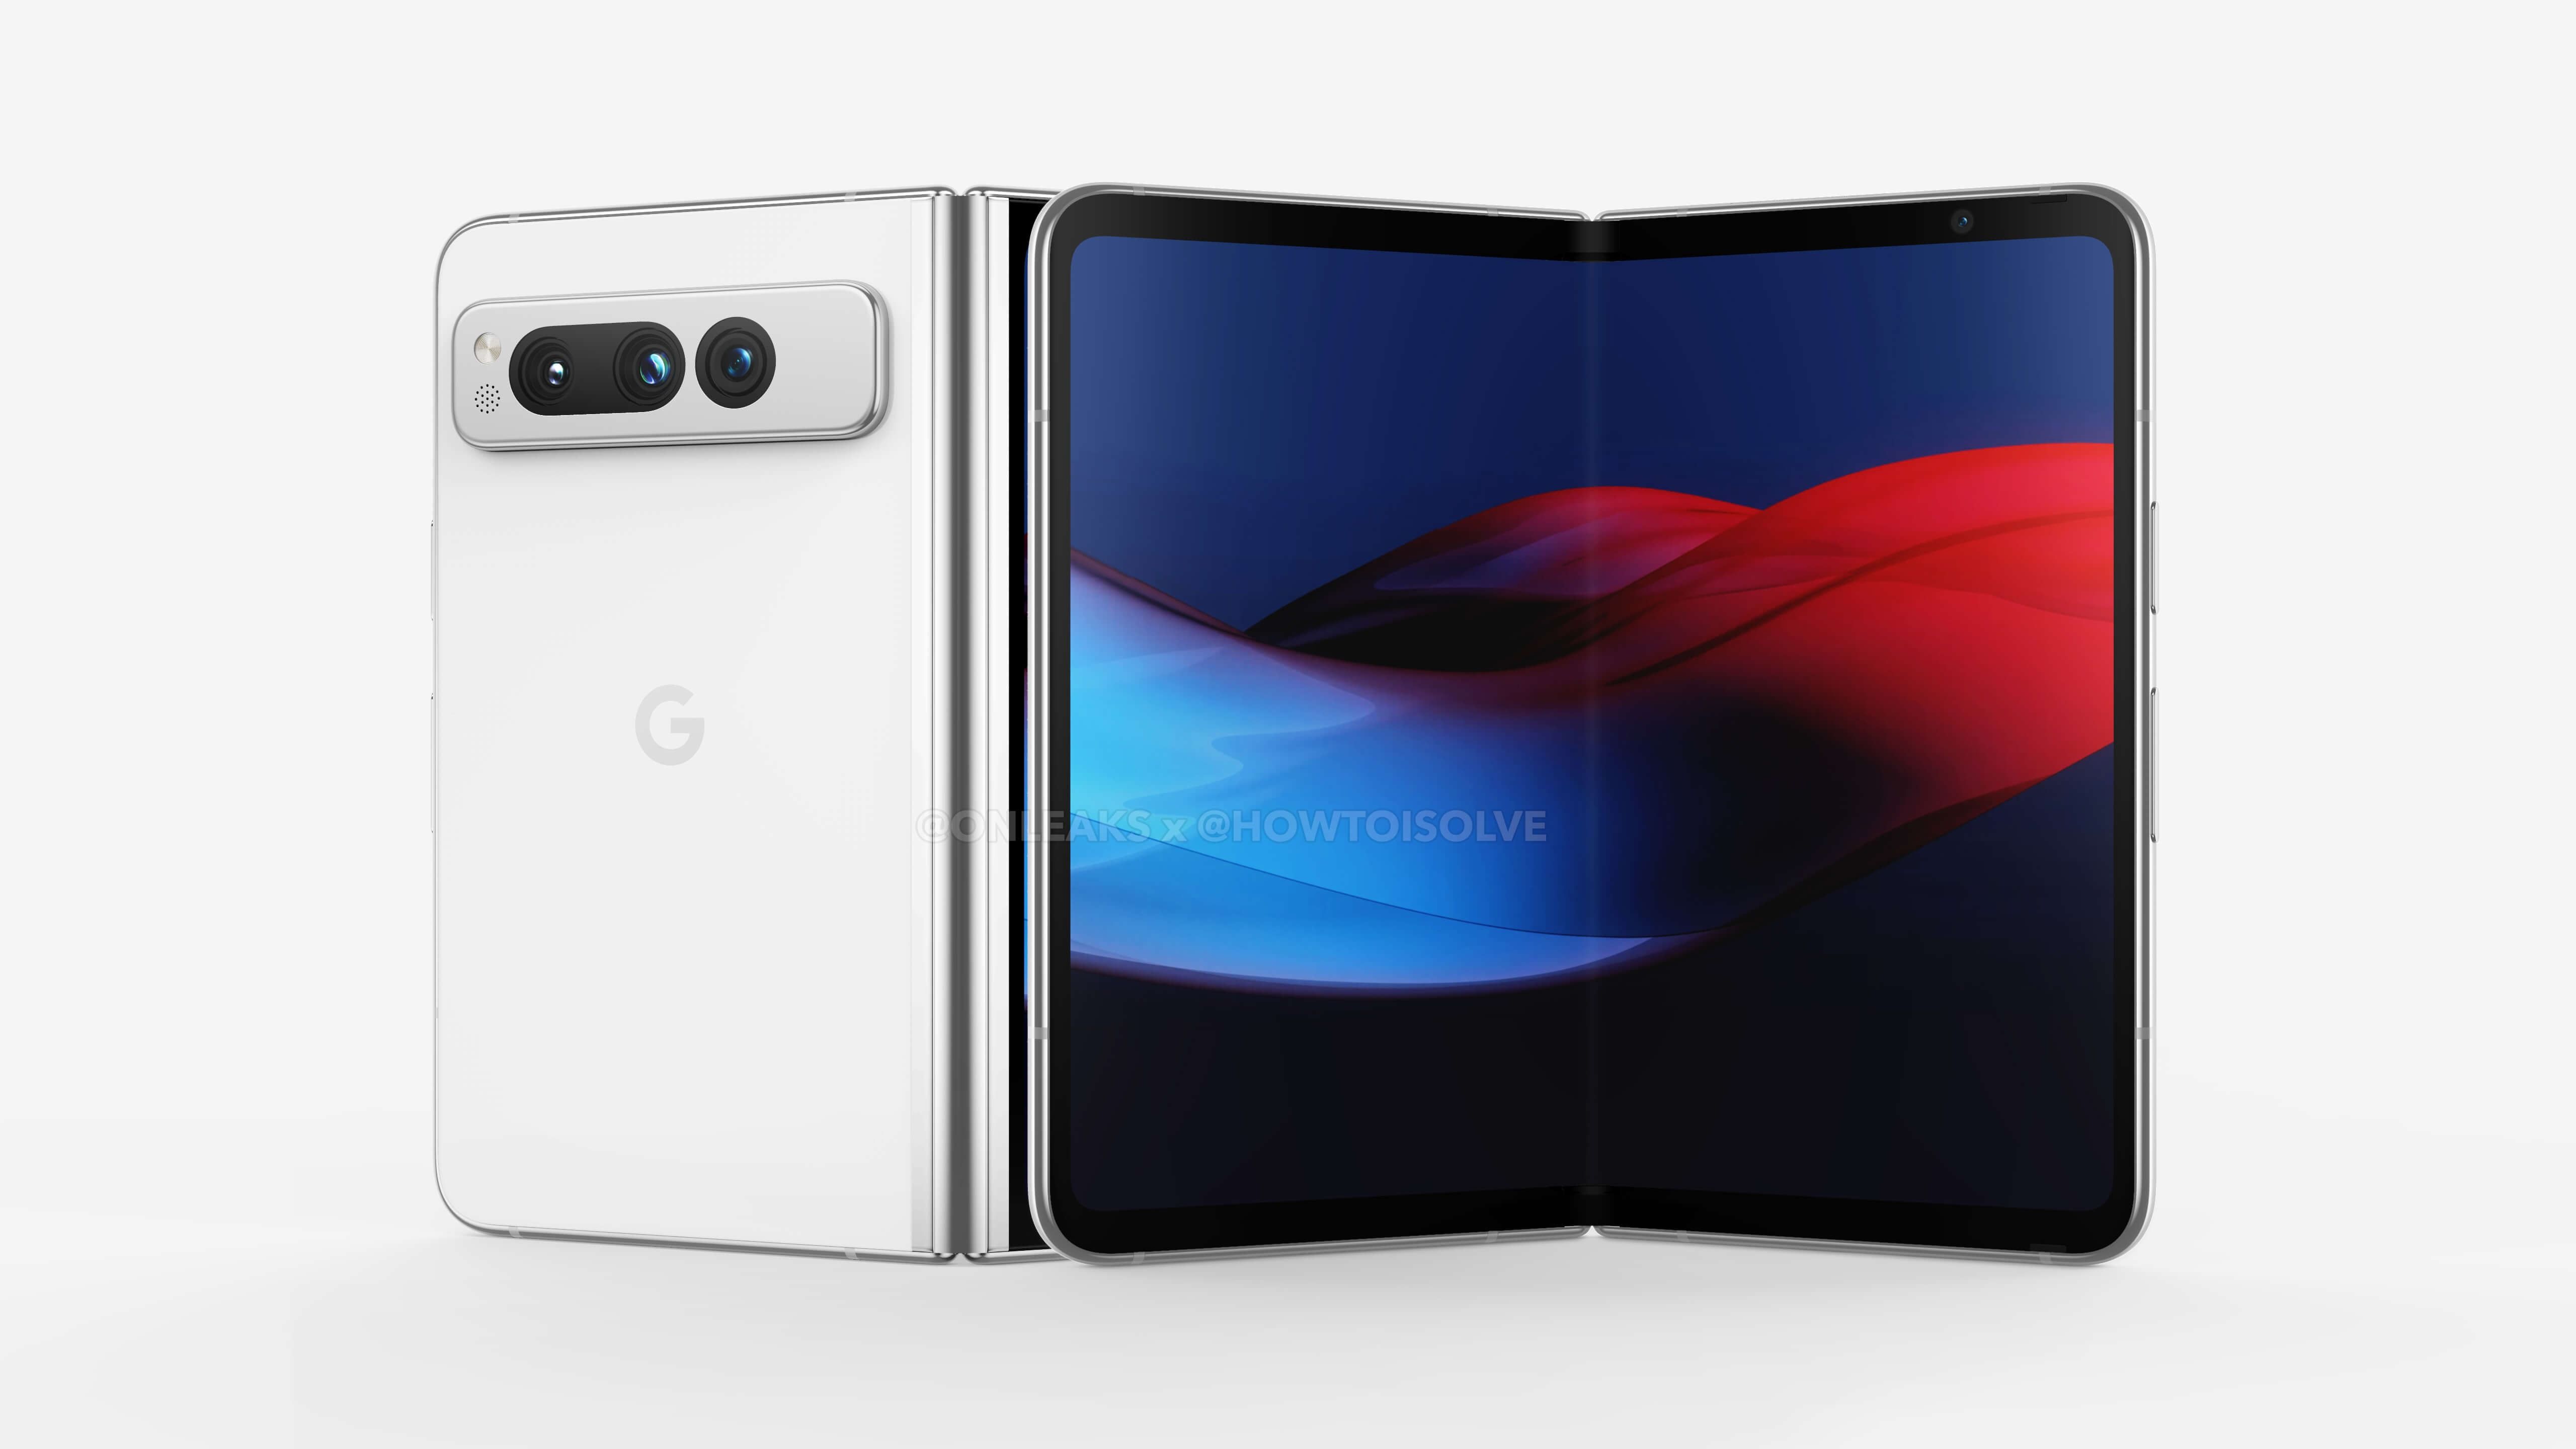 Leaked render of the Google Pixel Fold on cream colored background.